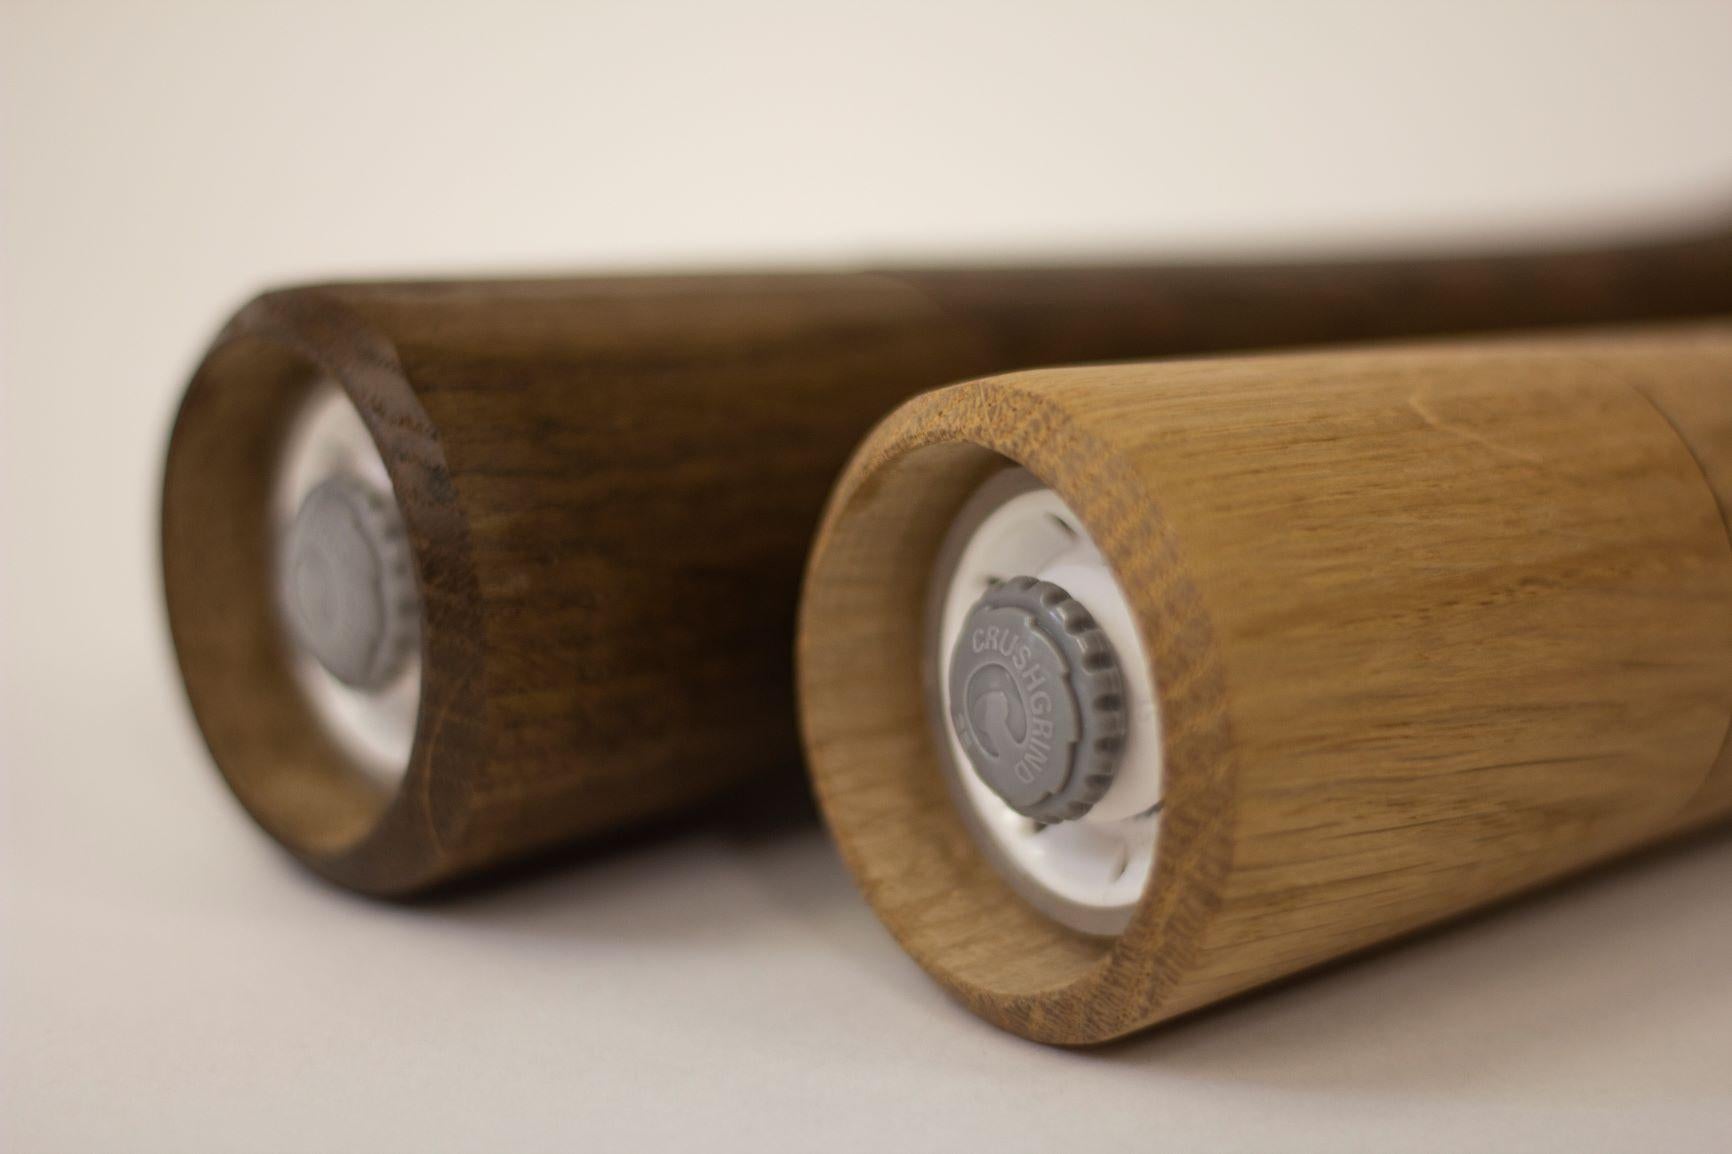 Our salt and pepper mills are hand-turned from solid English oak here in Norfolk, England. We work closely with local timber suppliers to ensure the quality of the oak and it's local provenance and sustainability.
The mechanism is the world class,